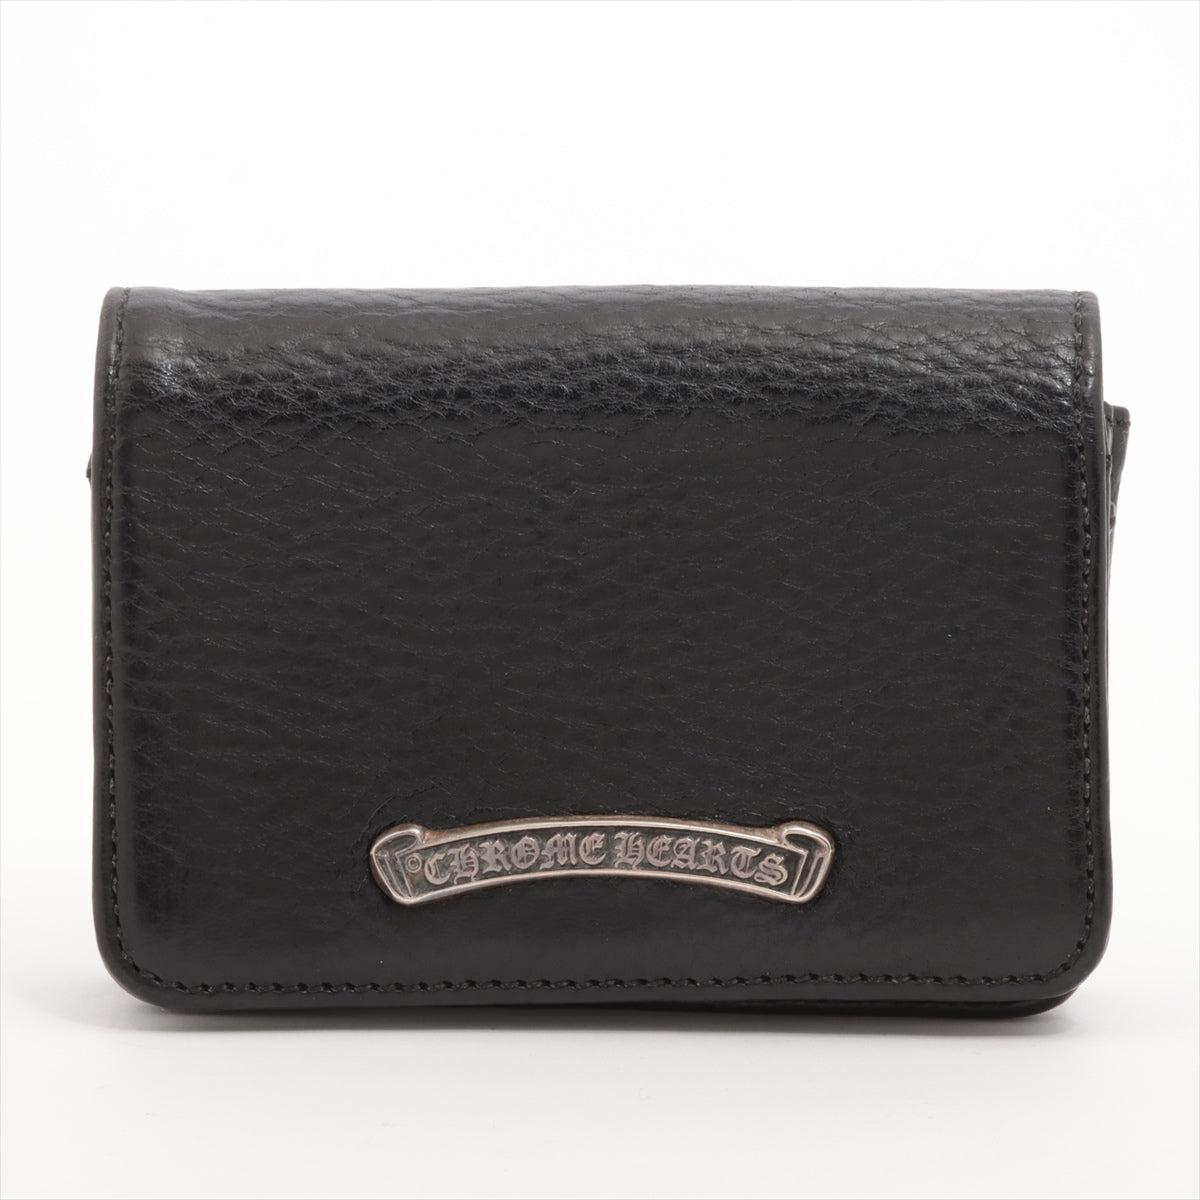 Chrome Hearts Card Case Unknown material Black × Silver logo plate